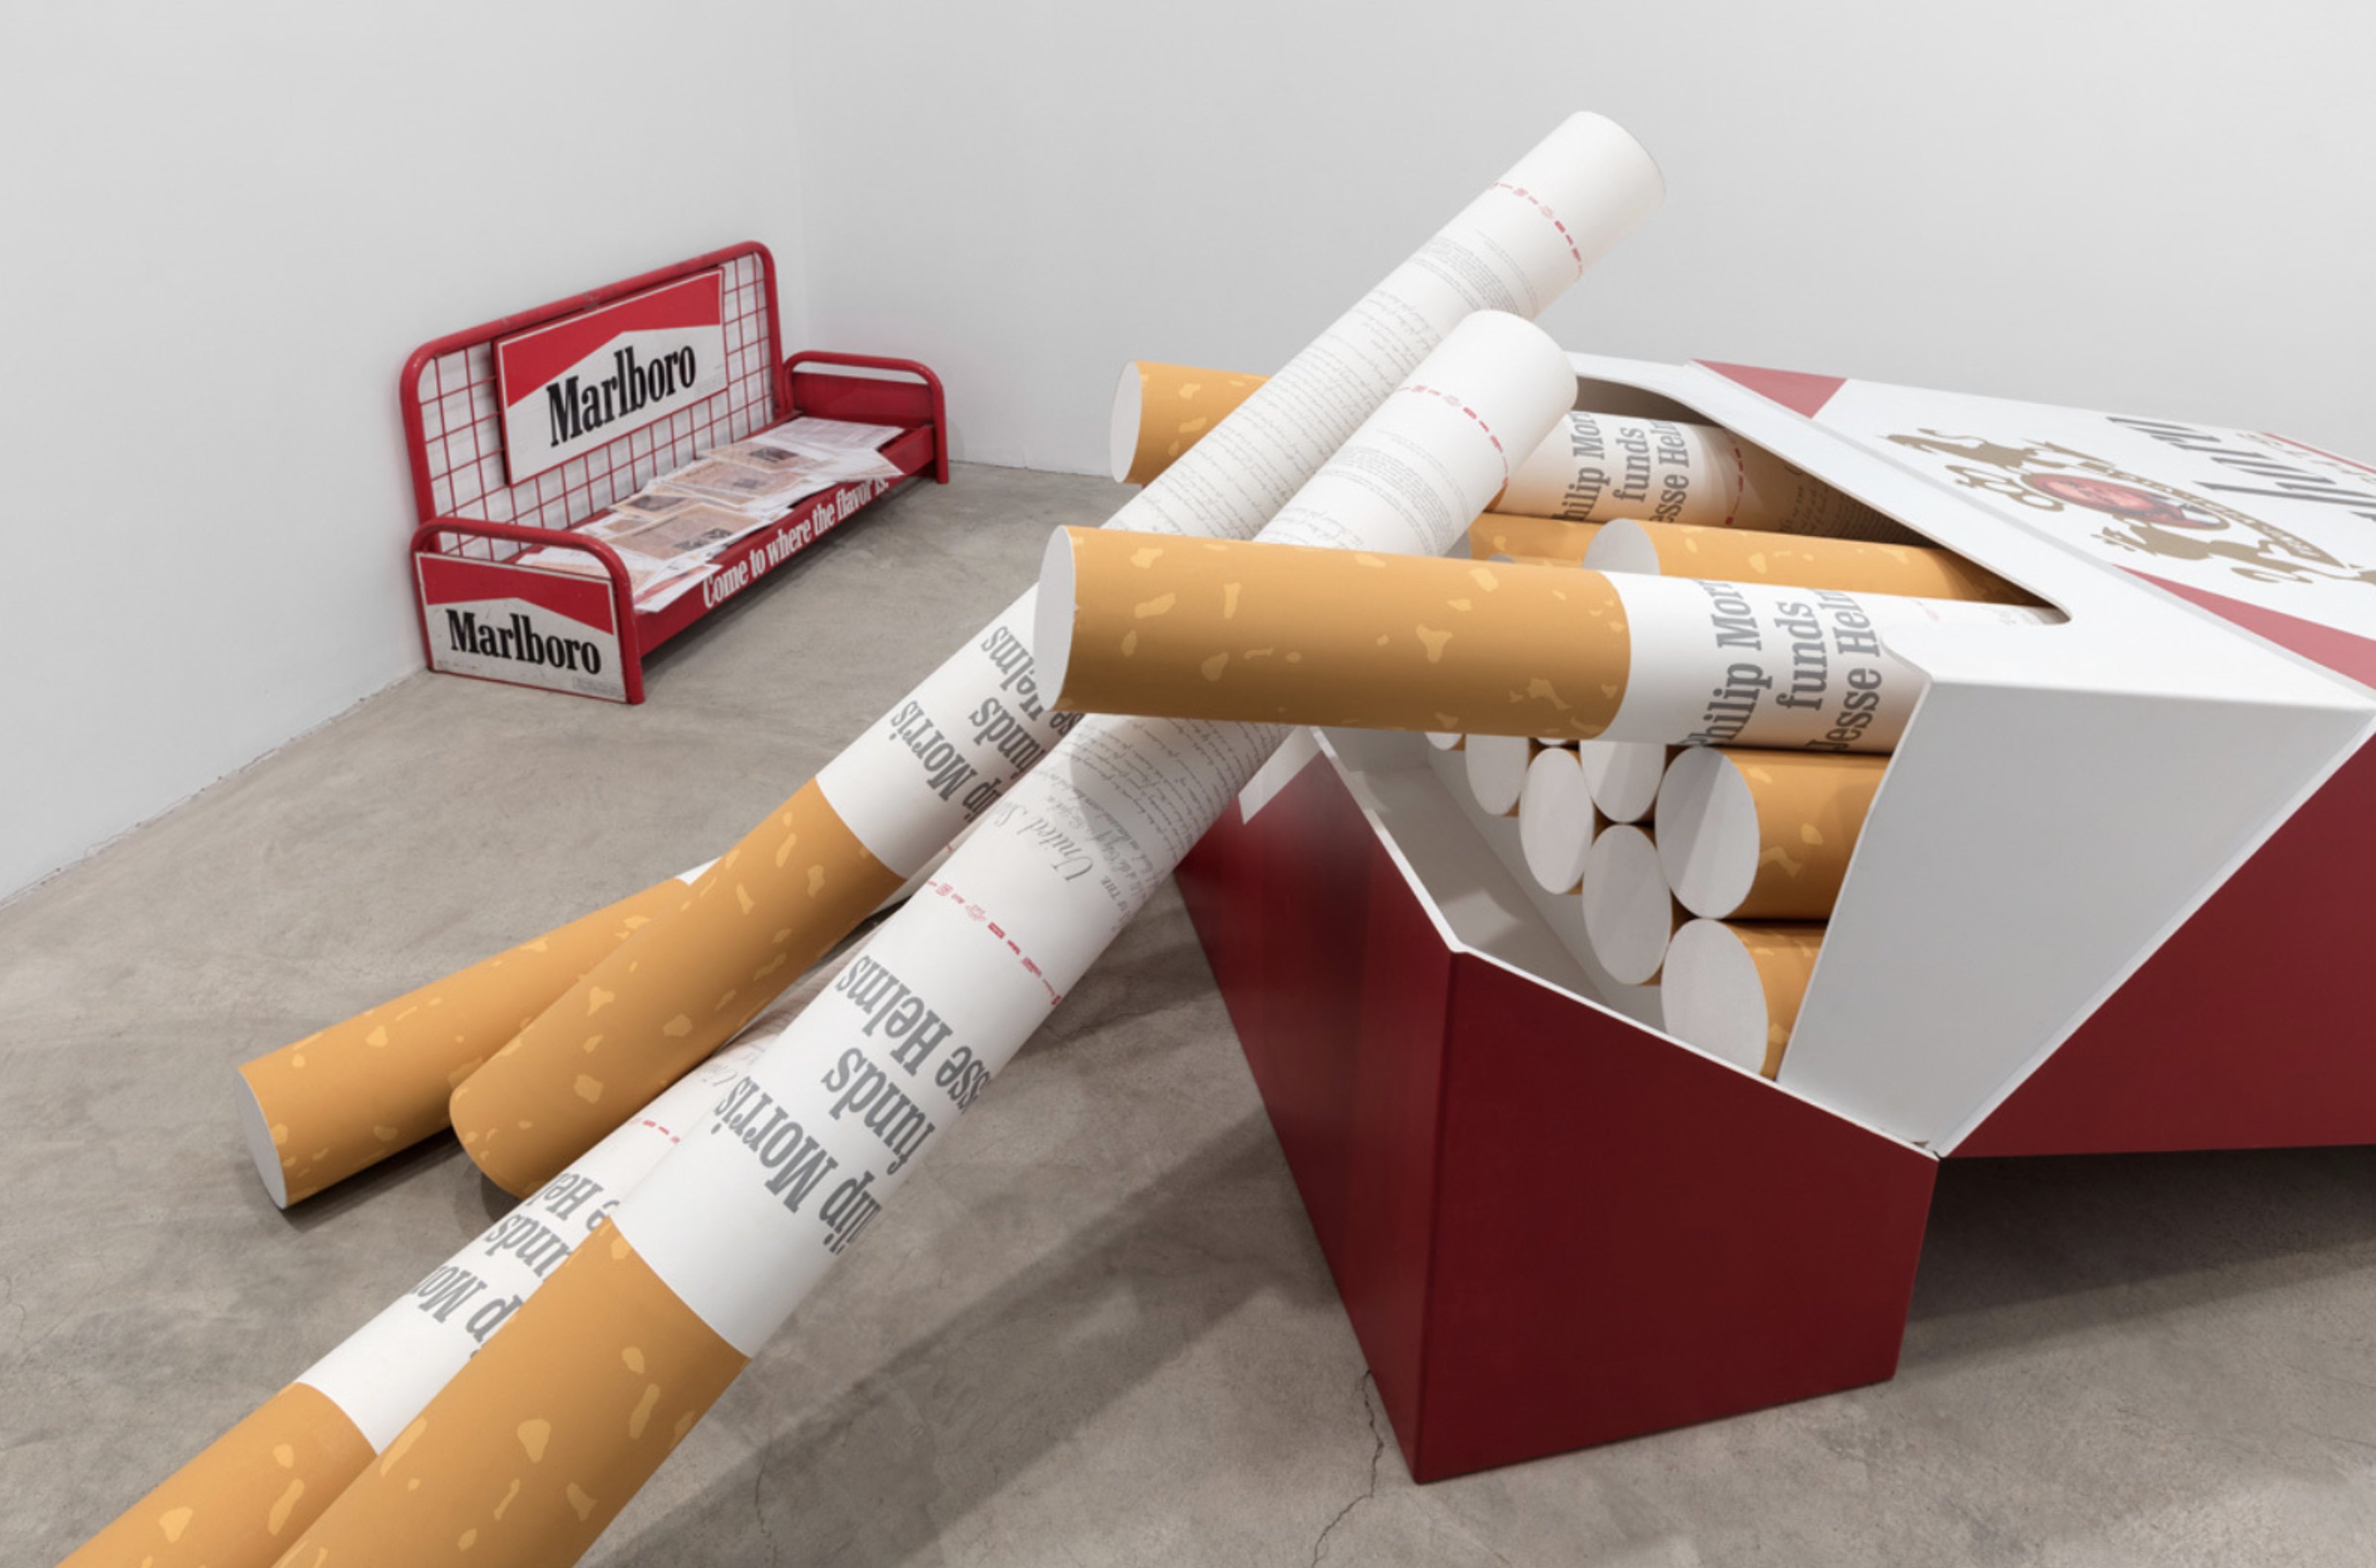 Cigarette pack and cigarettes, made to larger scale. On the cigarettes: 